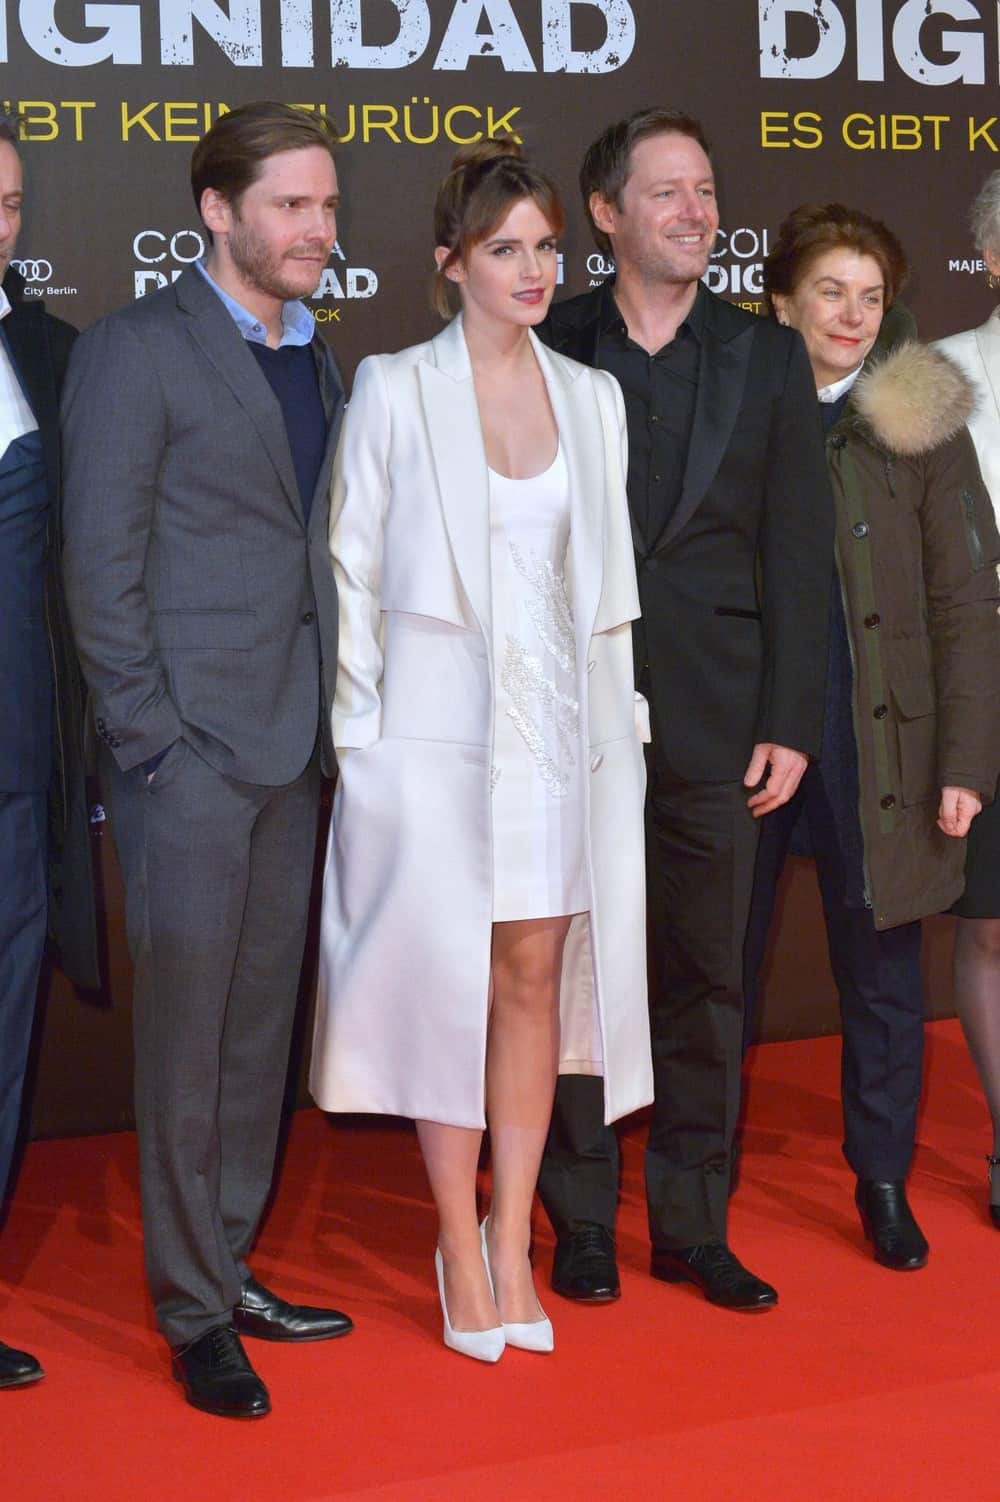 Emma Watson in a Revealing White Dress at the Movie Premiere "Colonia"